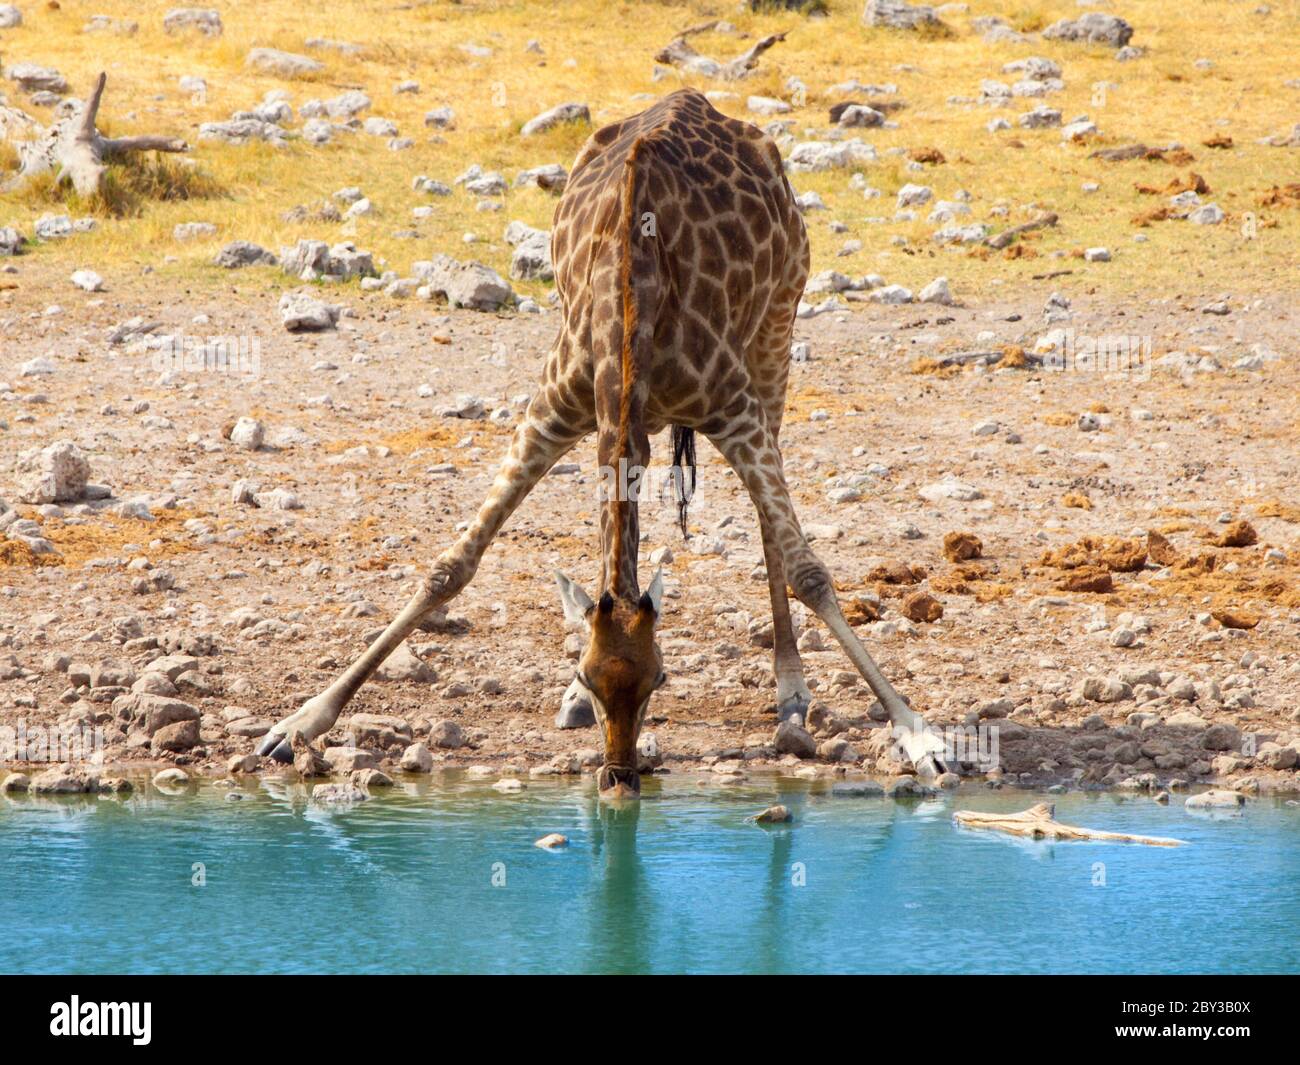 Thirsty giraffe drinking from waterhole in typical pose with wide spread legs, Etosha National Park, Namibia, Africa. Stock Photo